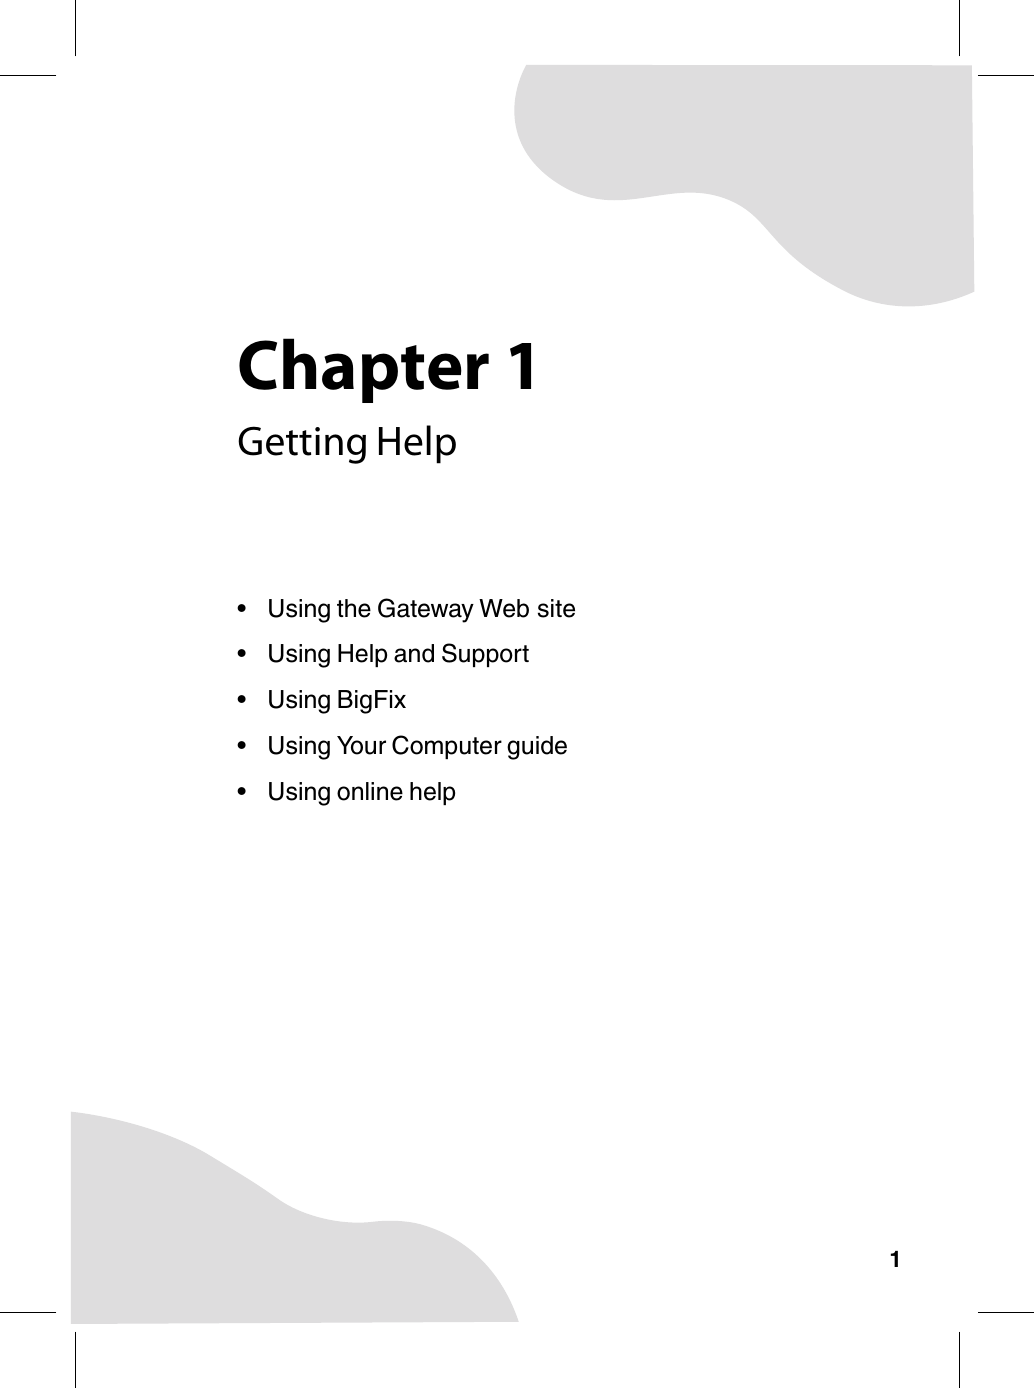 Chapter 11Getting Help• Using the Gateway Web site• Using Help and Support•Using BigFix• Using Your Computer guide• Using online help